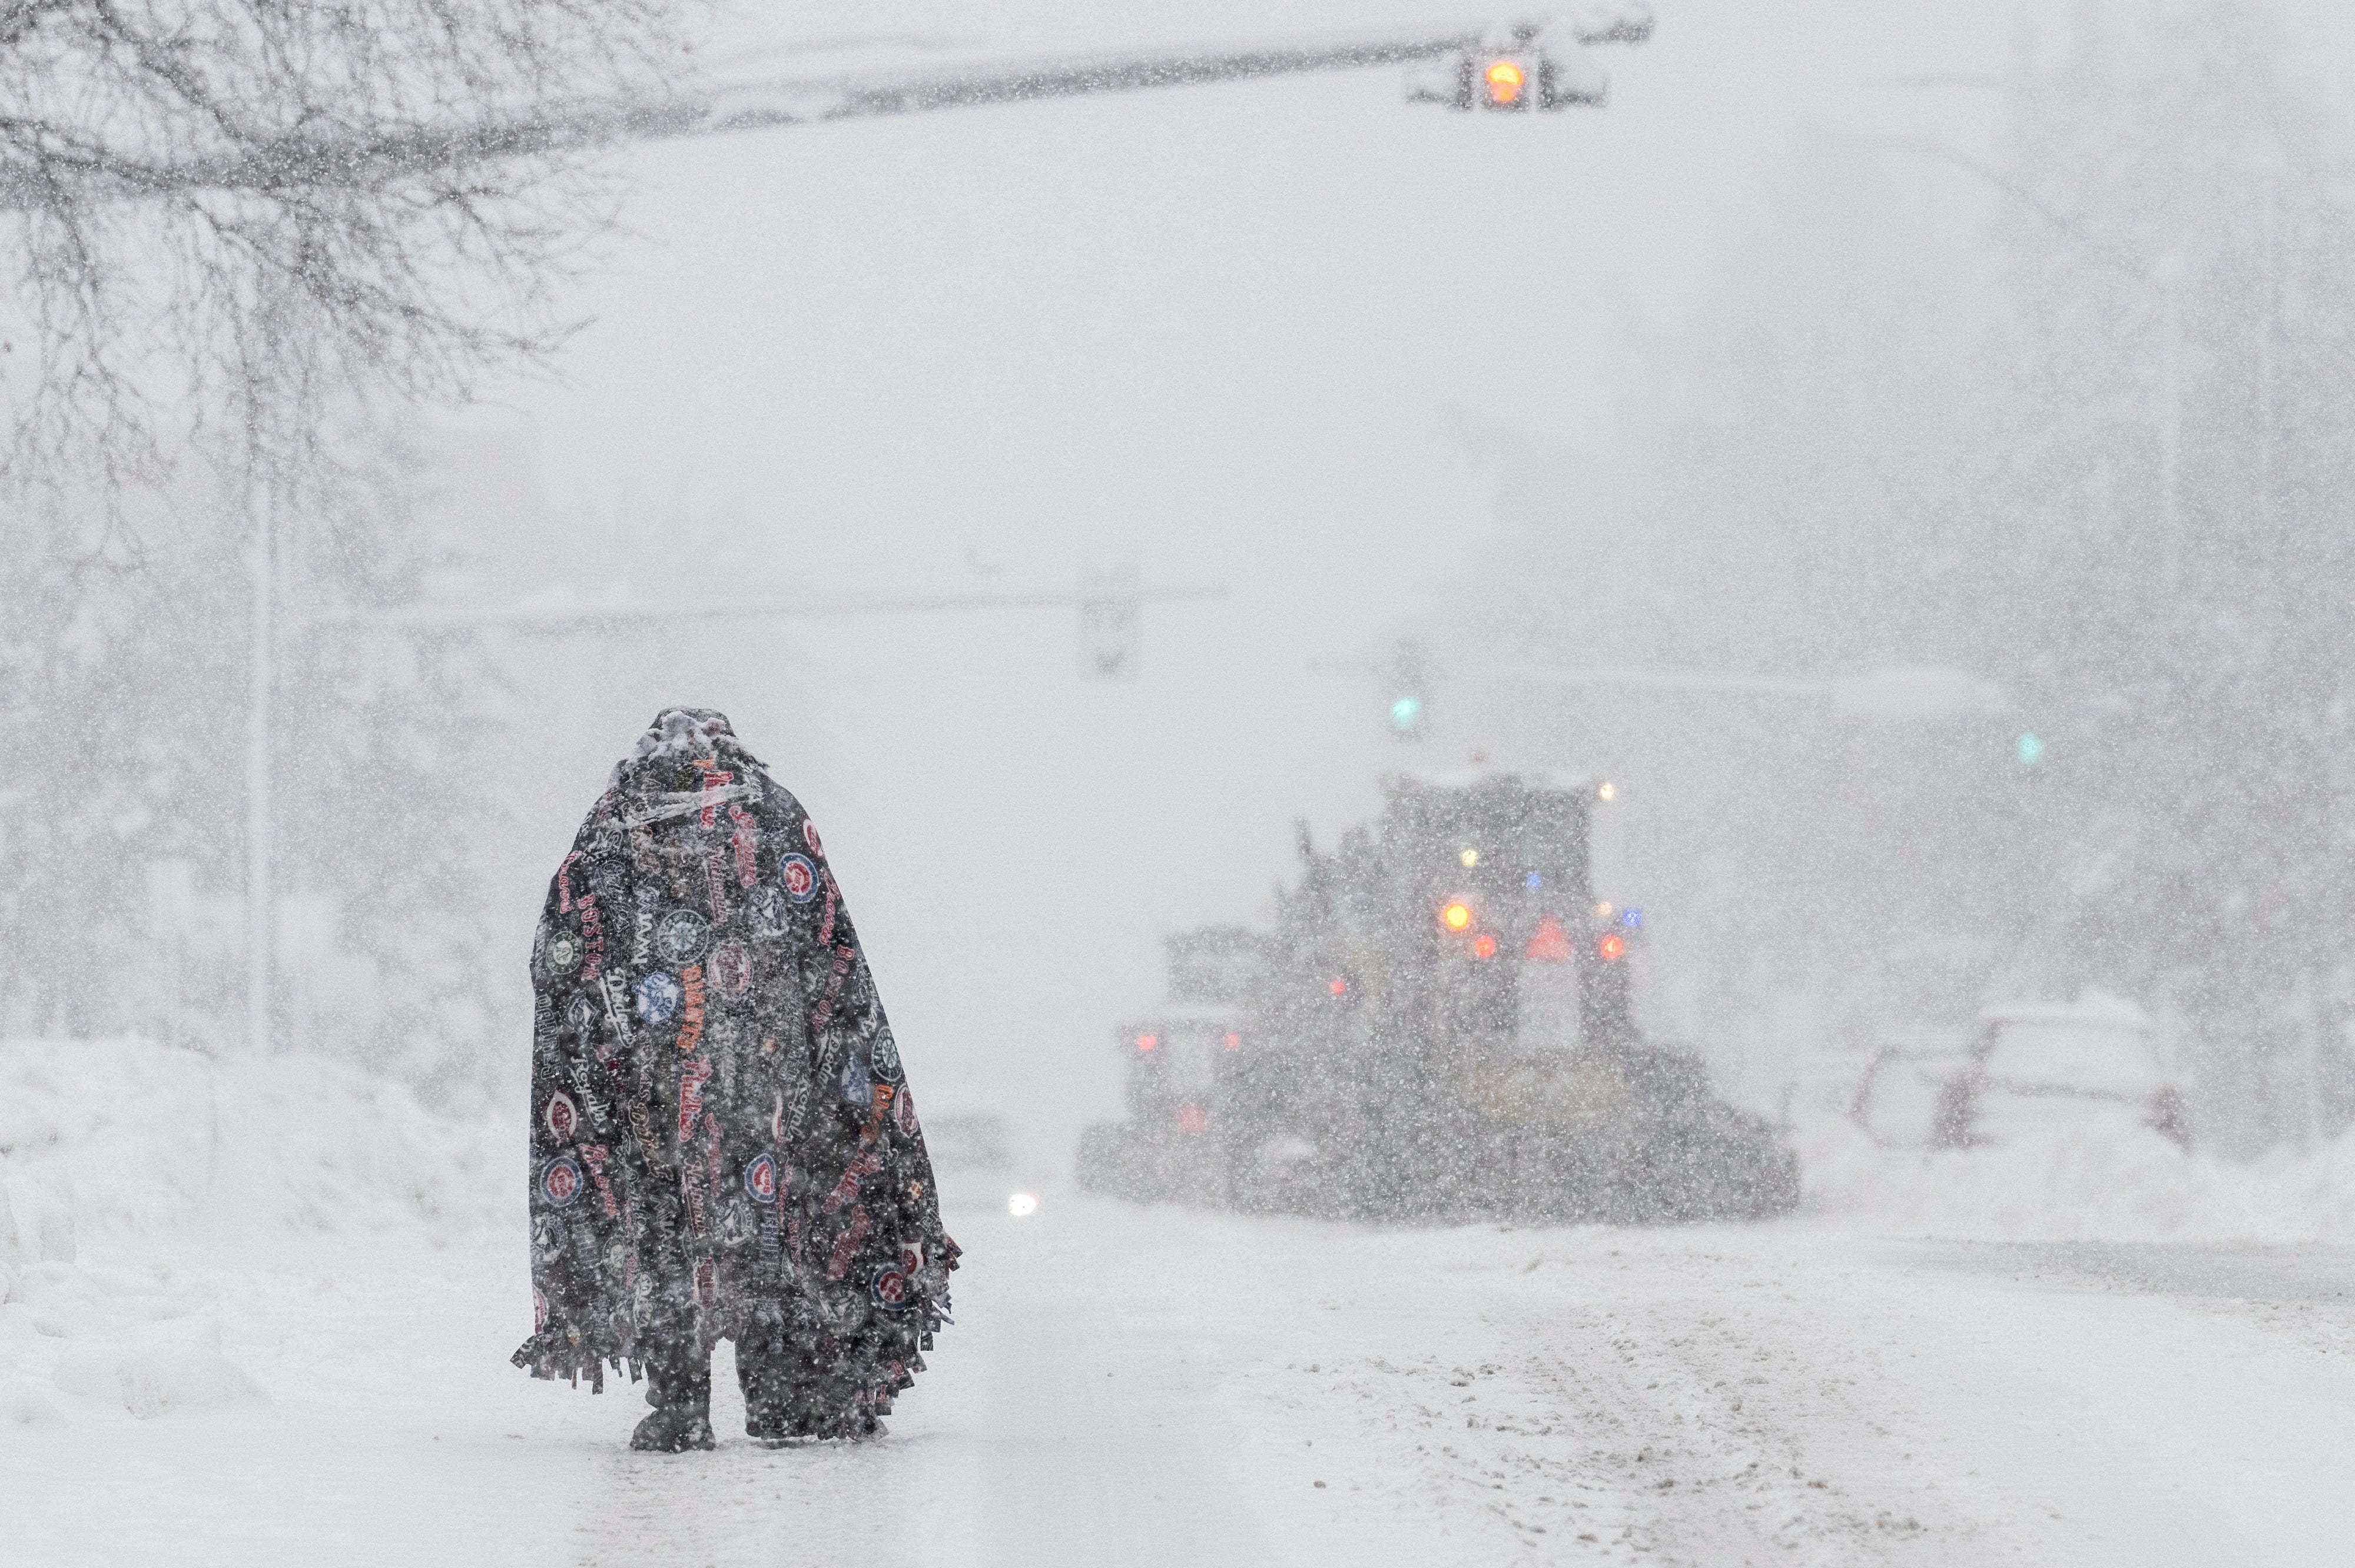 A pedestrian takes cover under a blanket in Anchorage as plows clear the roadway on 9 November